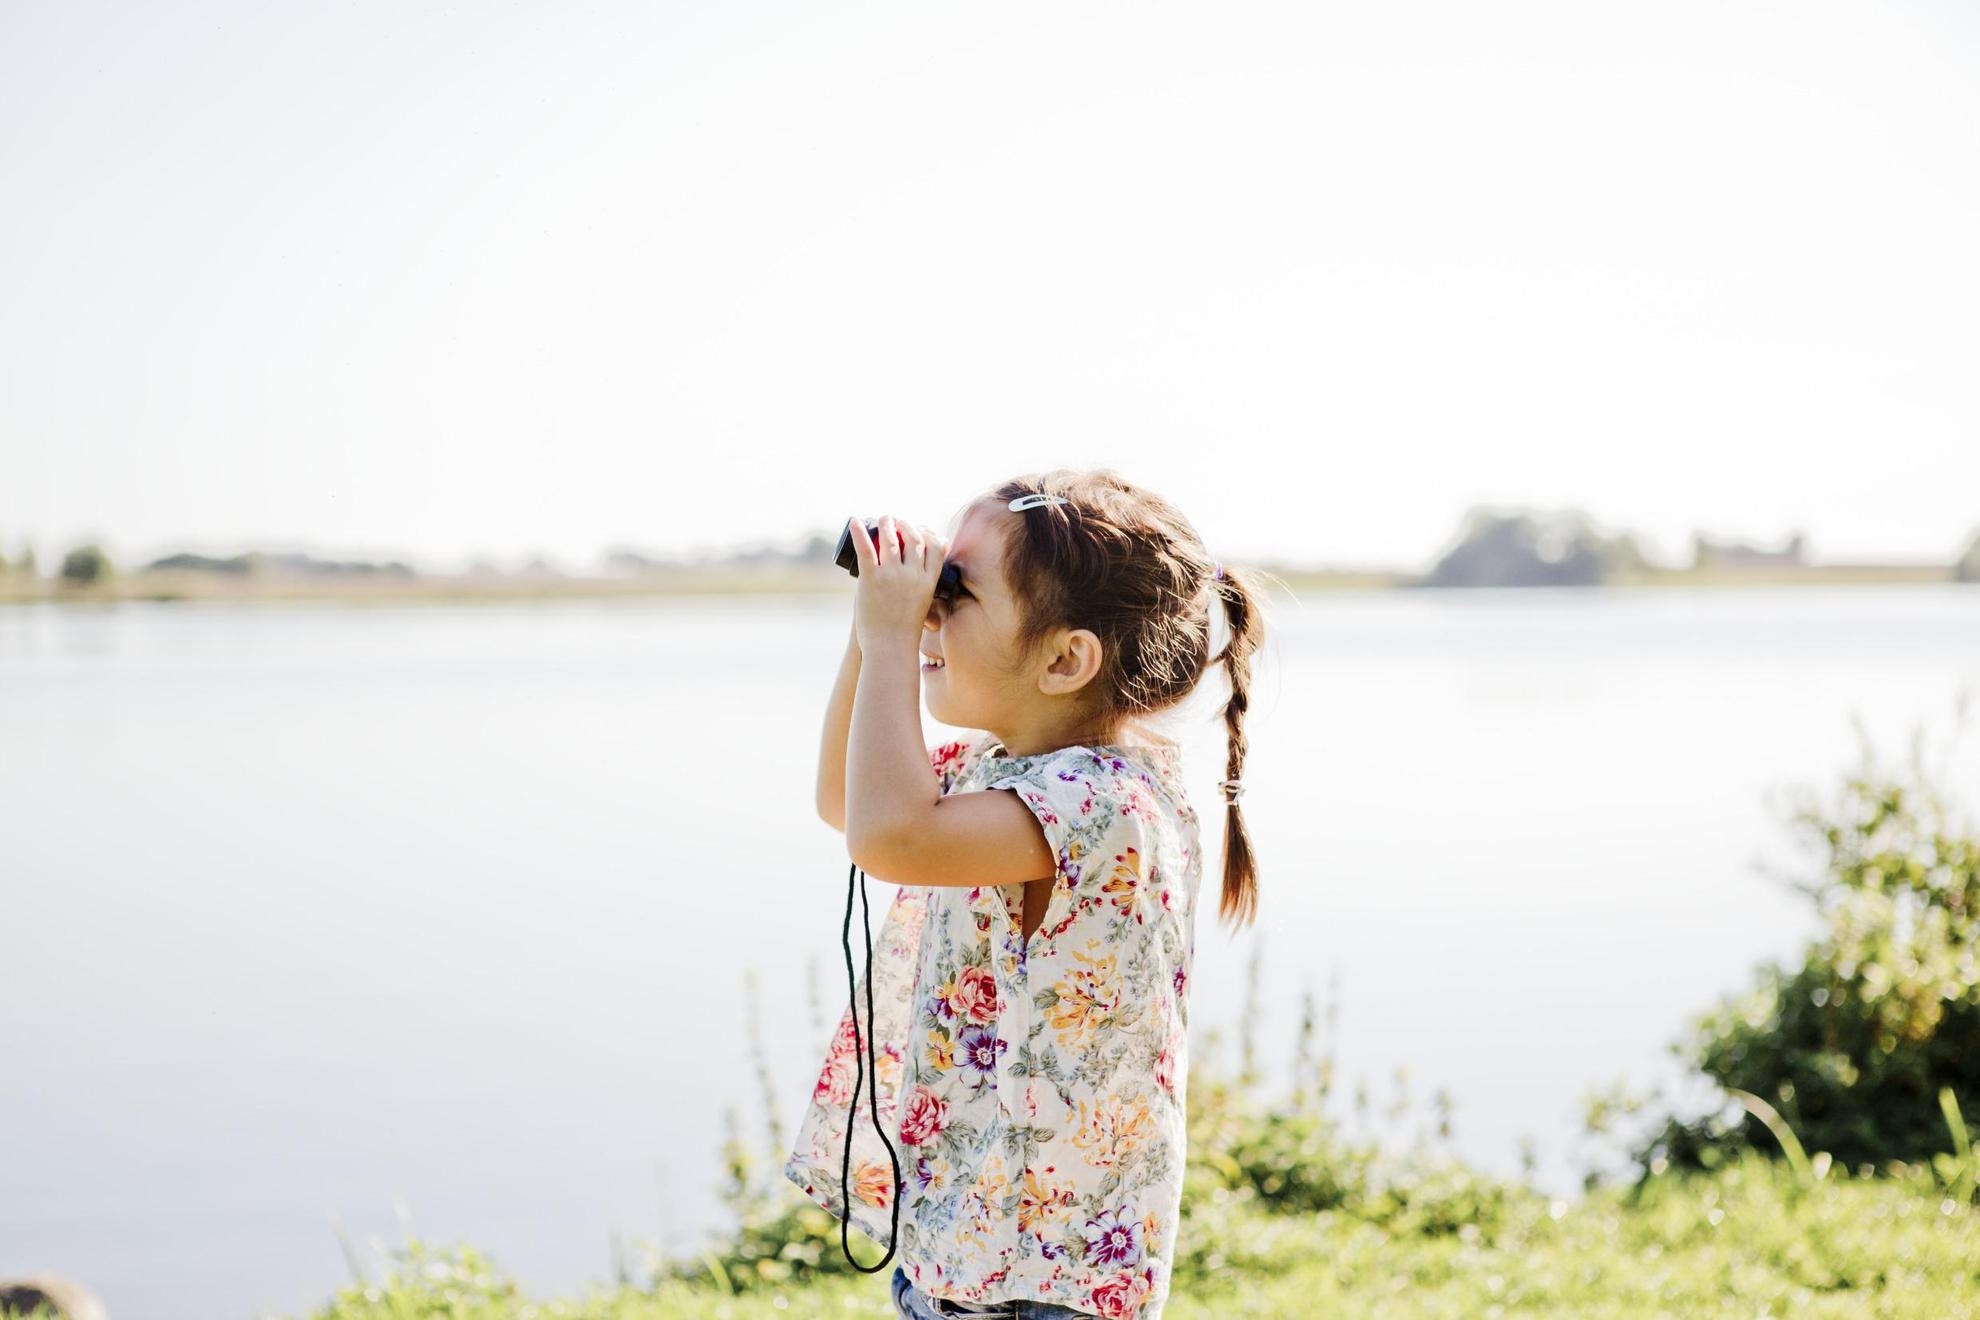 A girl by a lake is looking through binoculars.